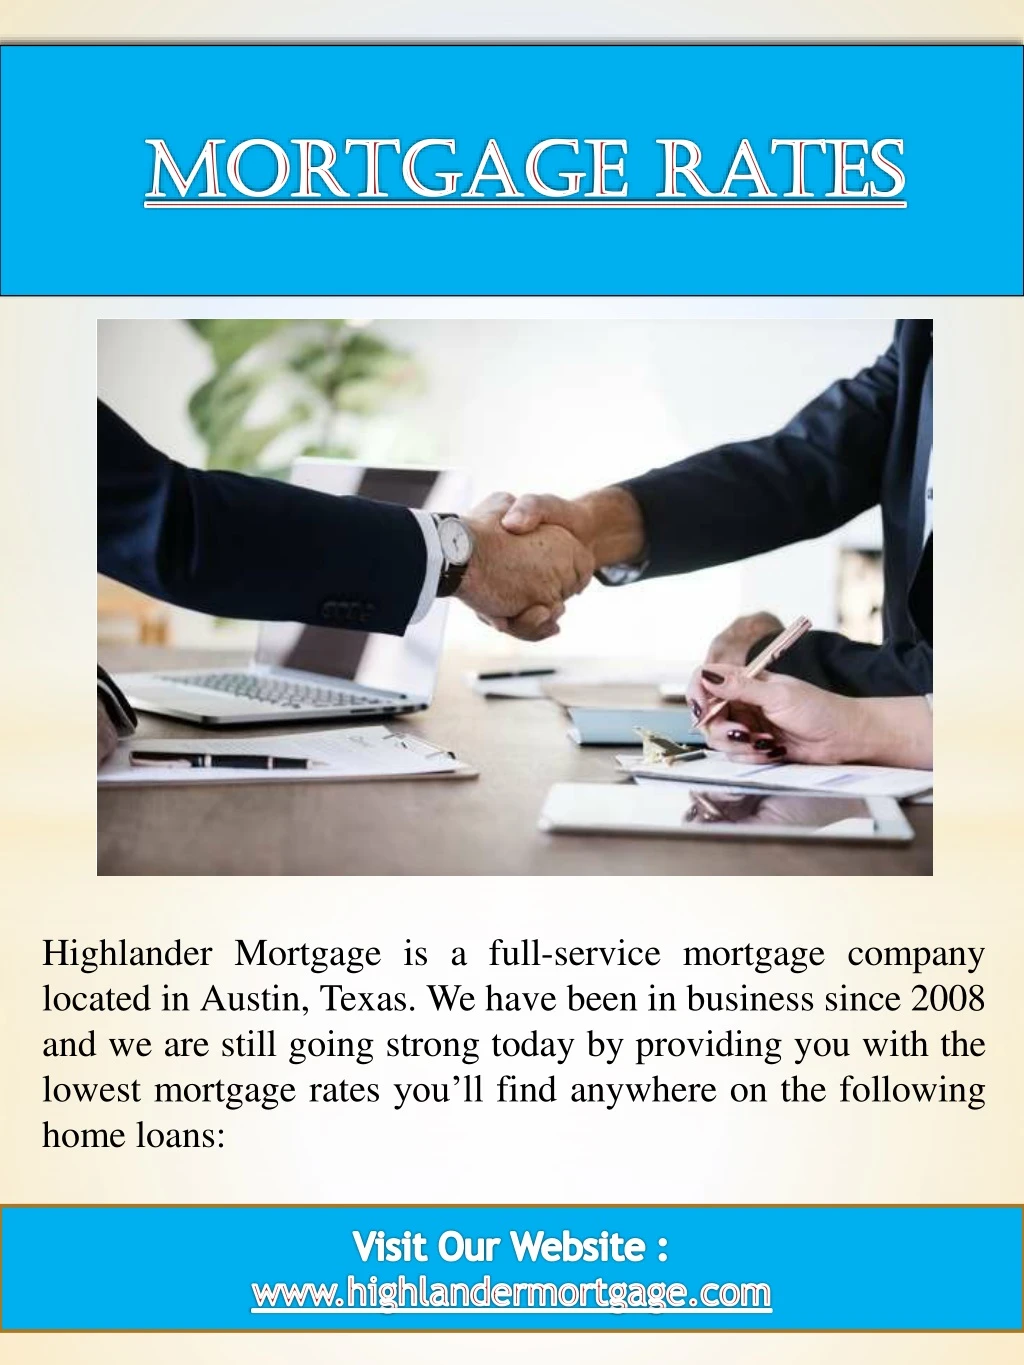 highlander mortgage is a full service mortgage